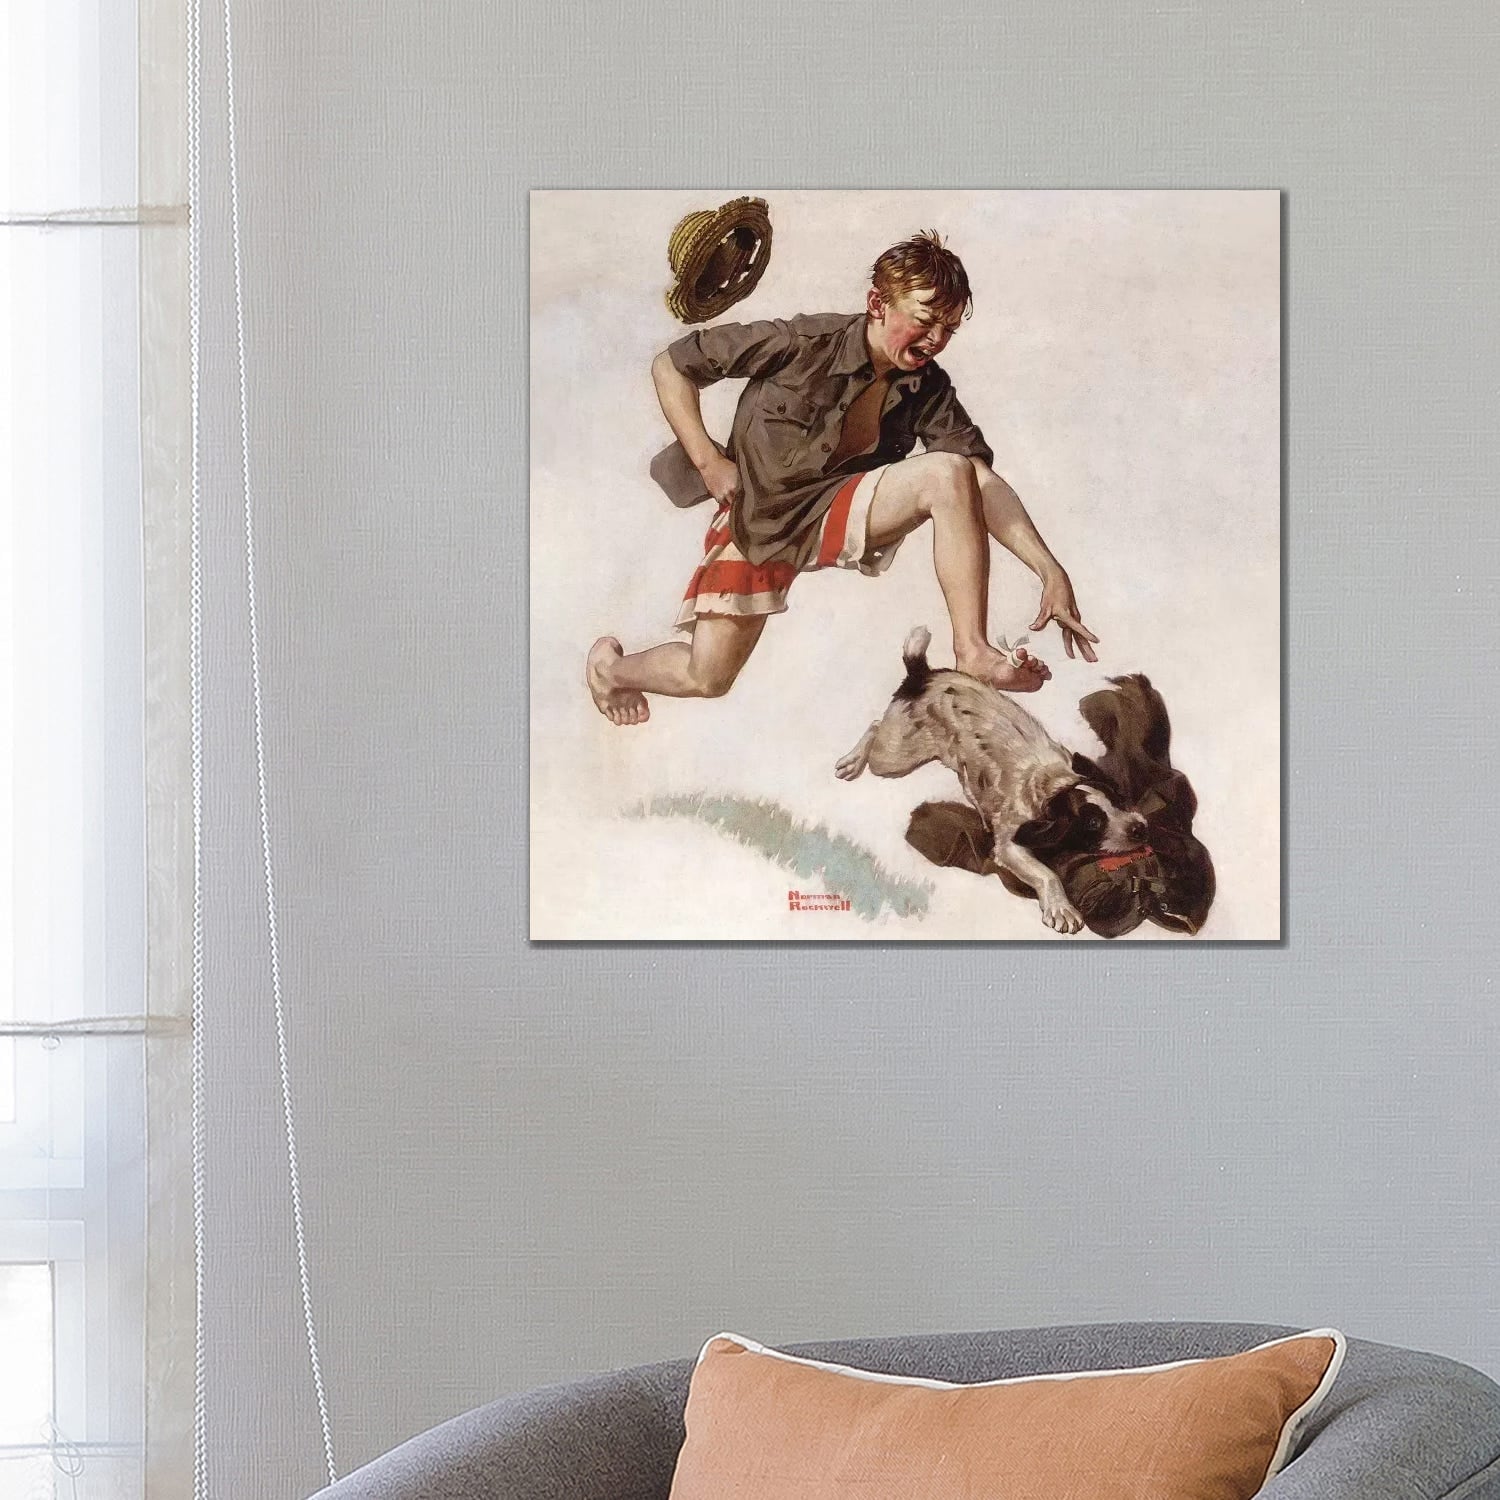 iCanvas Boy Chasing Dog with Pants by Norman Rockwell Canvas